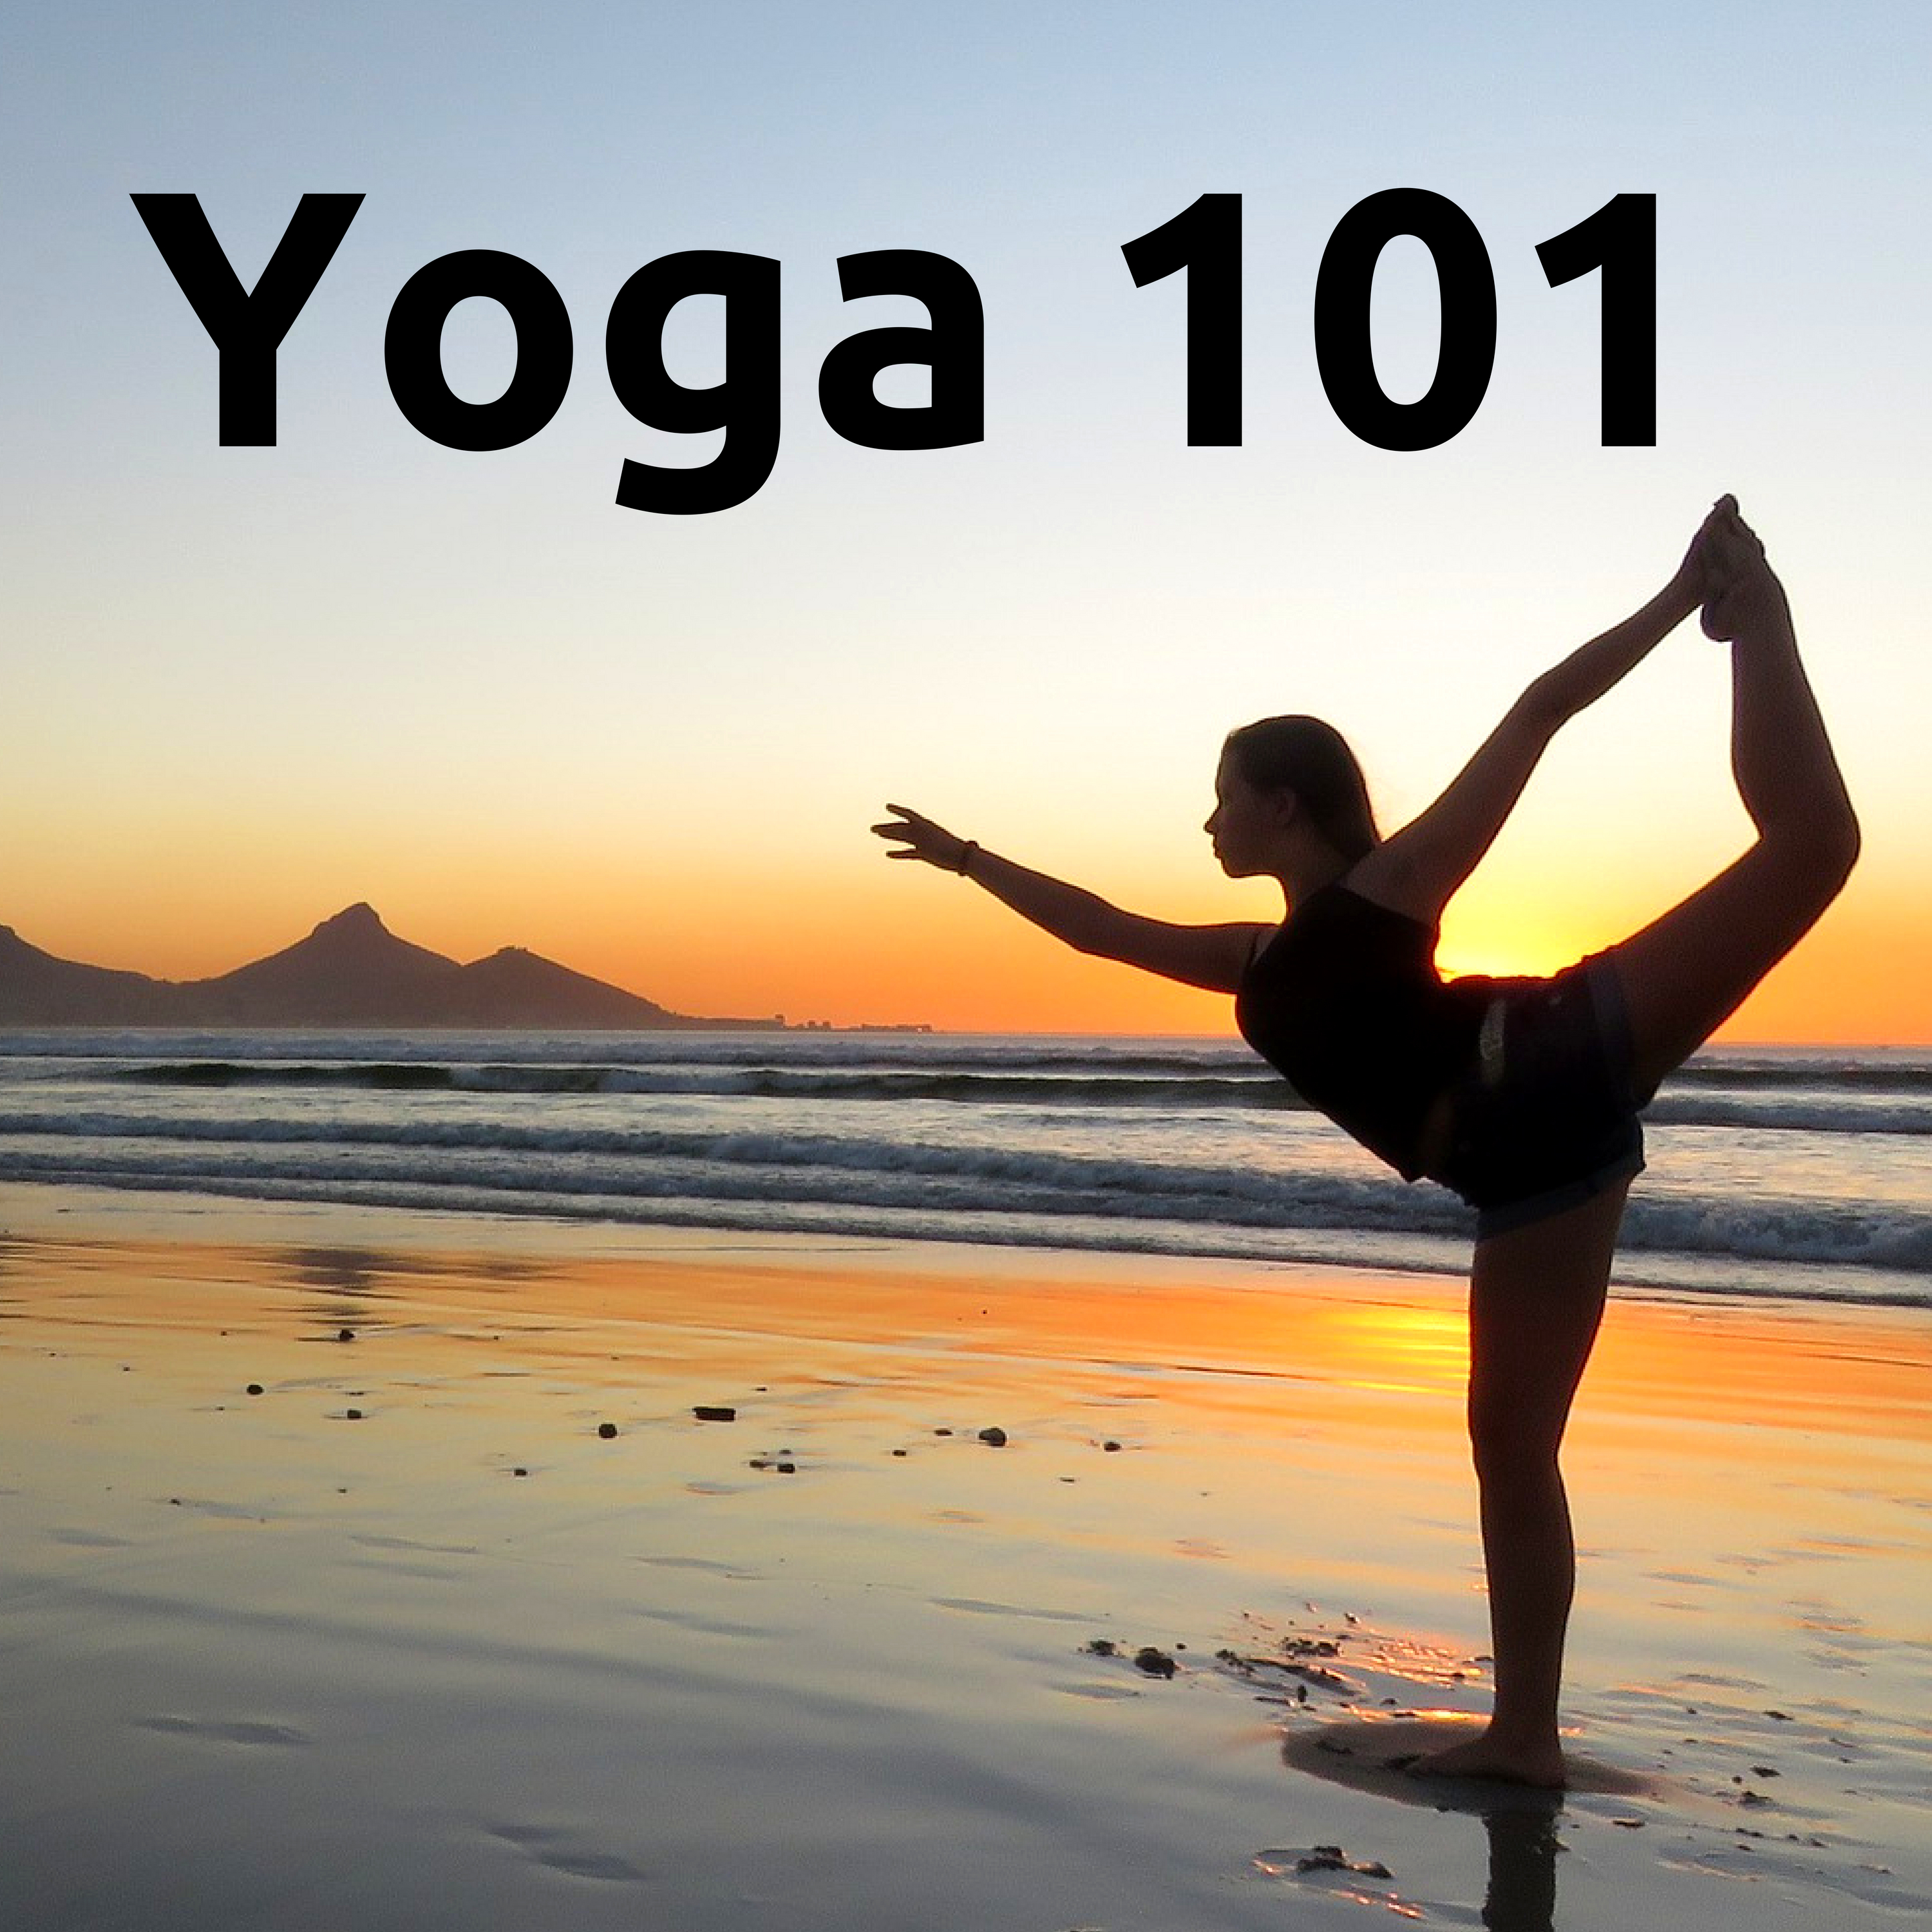 Yoga 101 Relaxing Music - Daily Yoga Practice